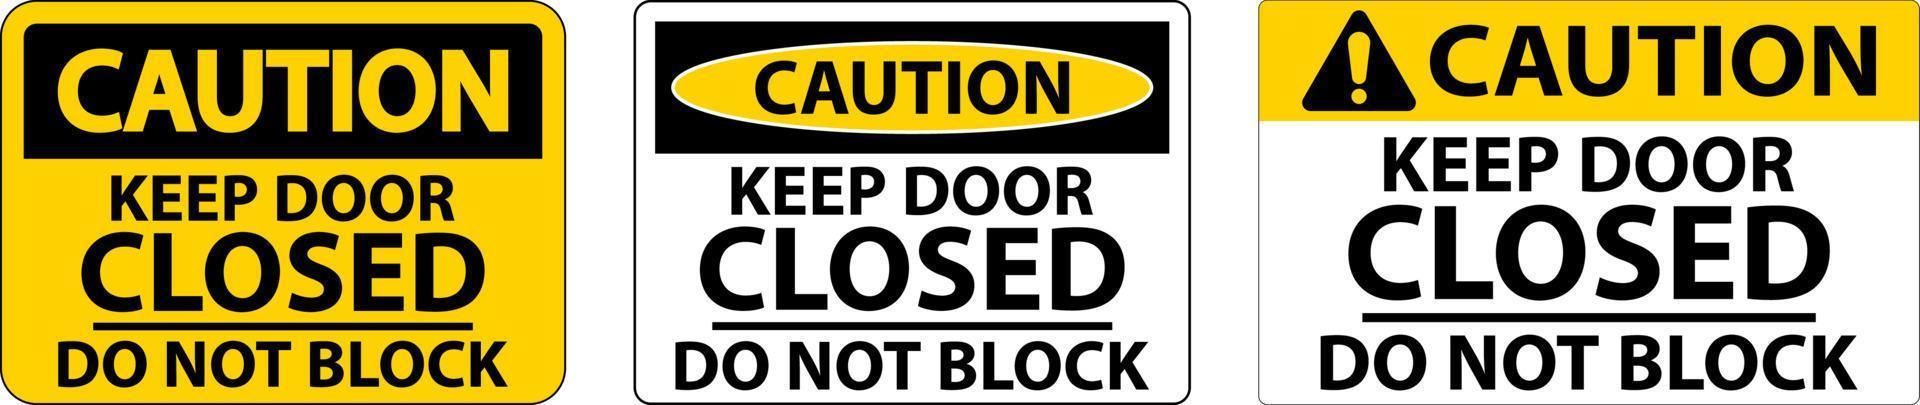 Caution Keep Closed Do Not Block Sign vector